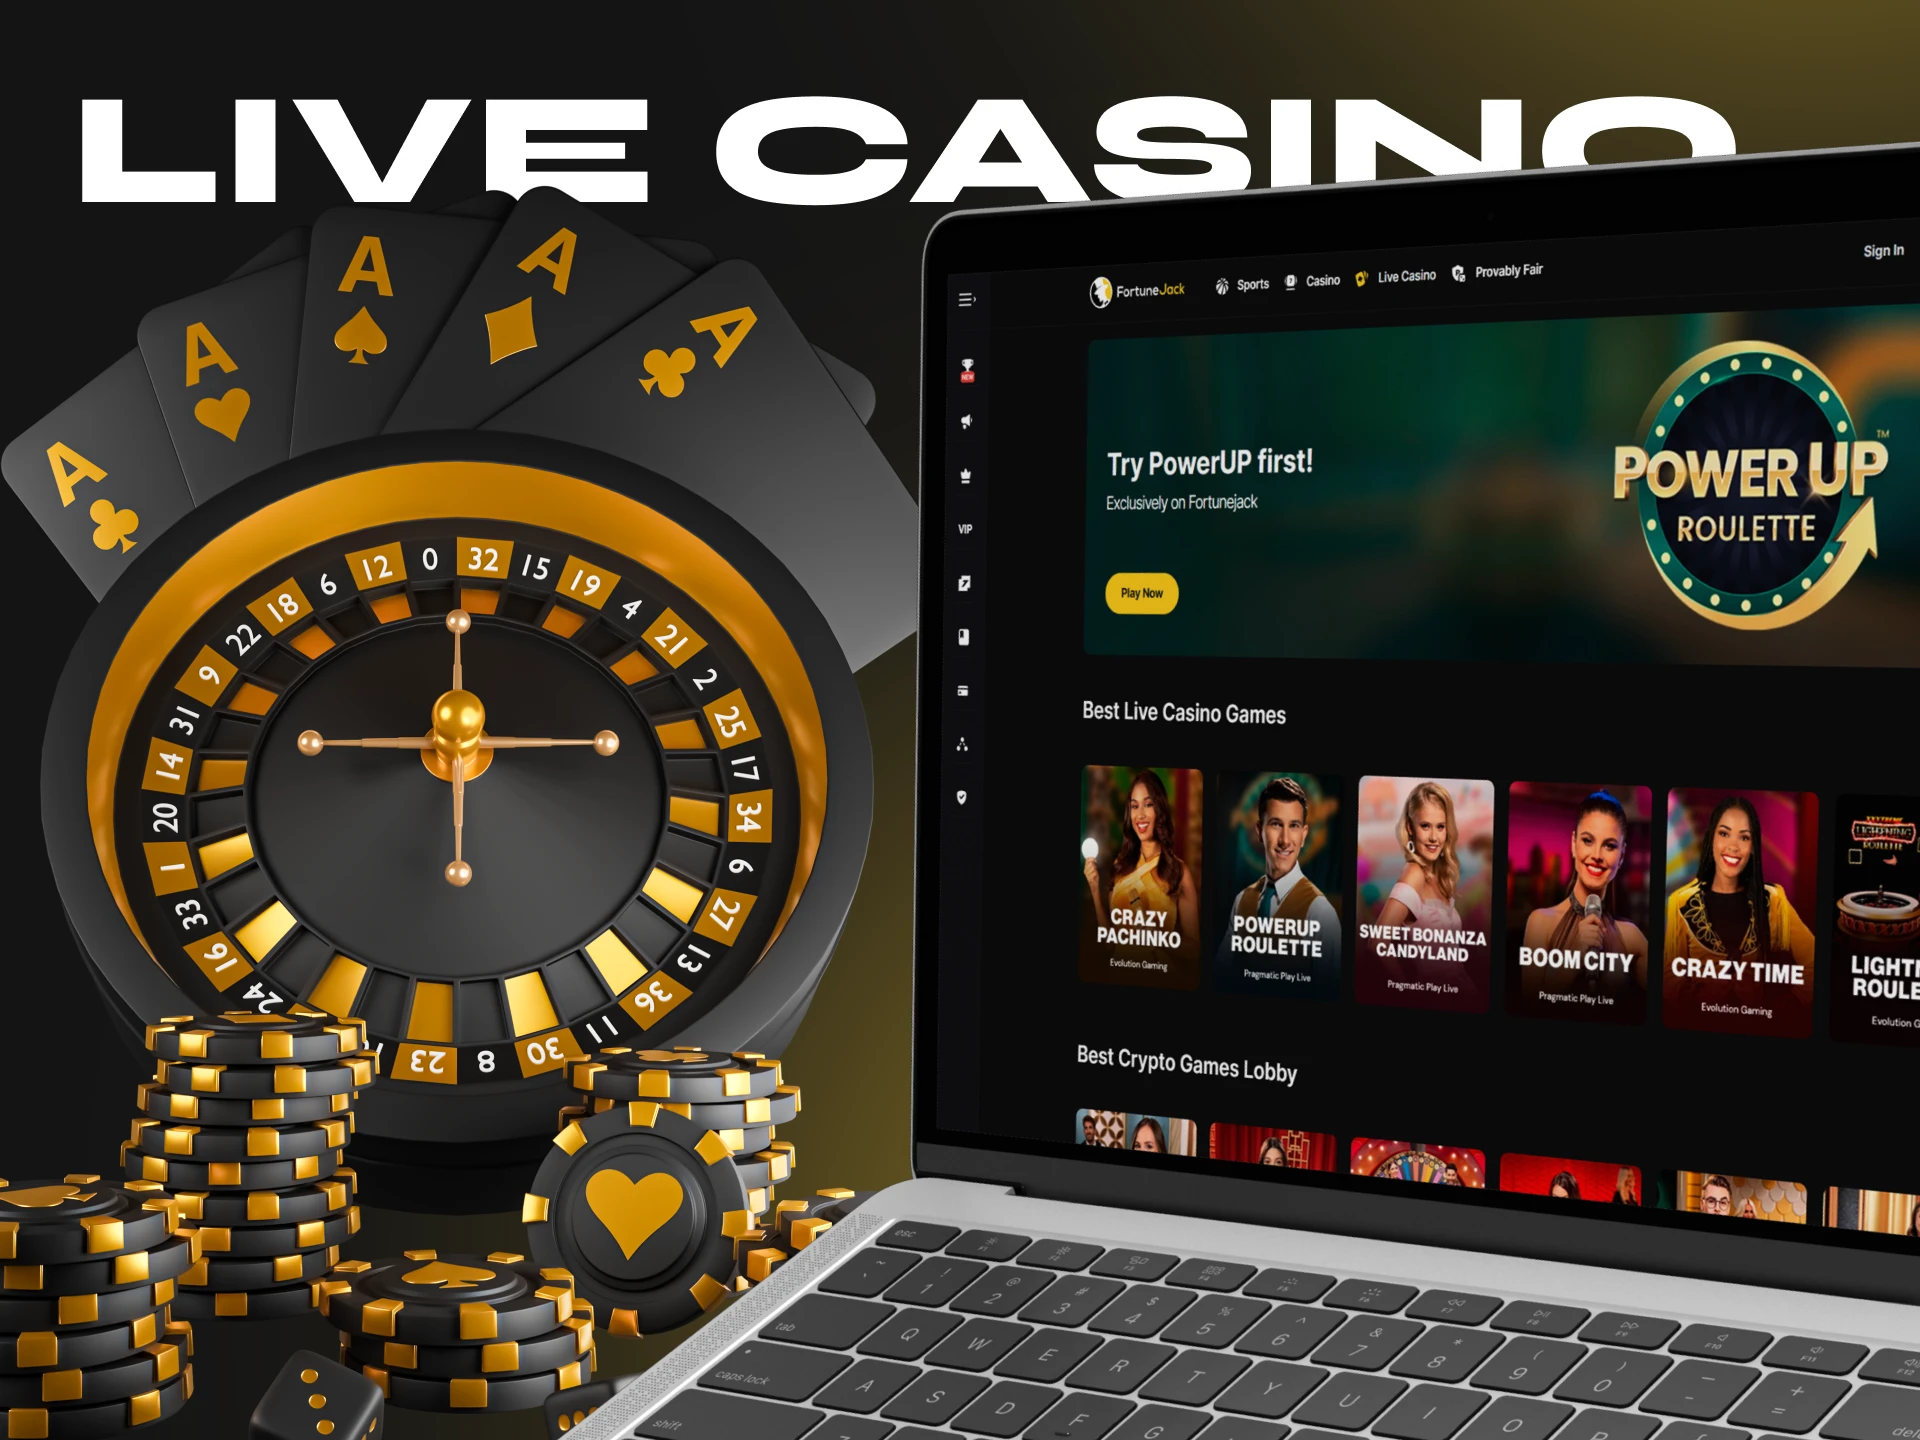 If you are looking for live casino games, try FortuneJack Casino.